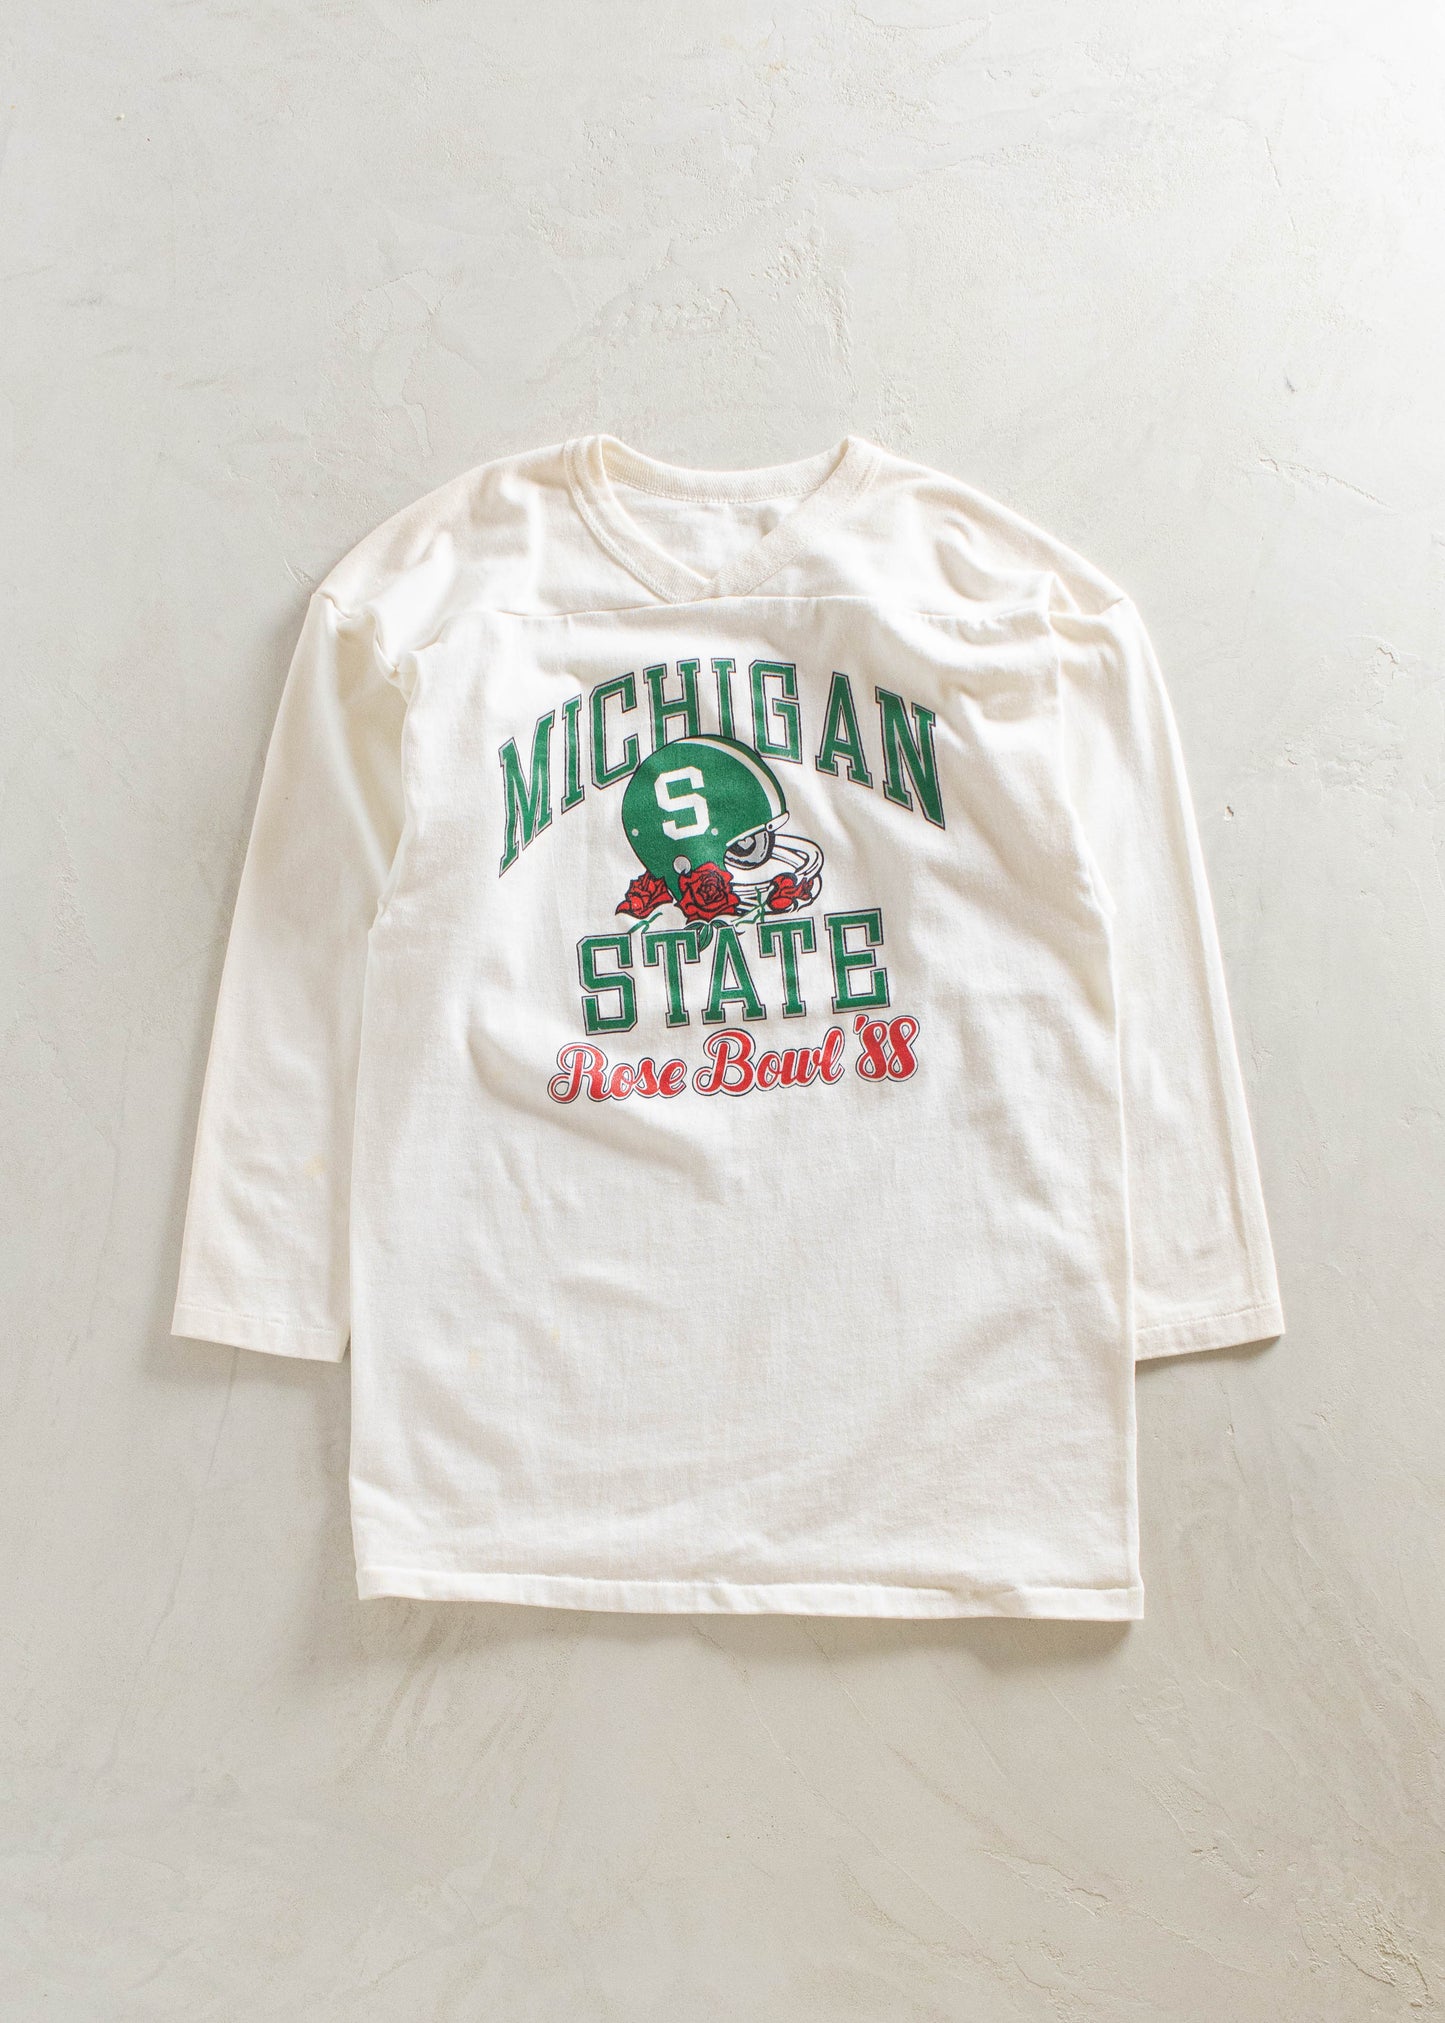 1980s Russel Athletic Michigan State Rose Bowl Long Sleeve Sport Jersey Size M/L